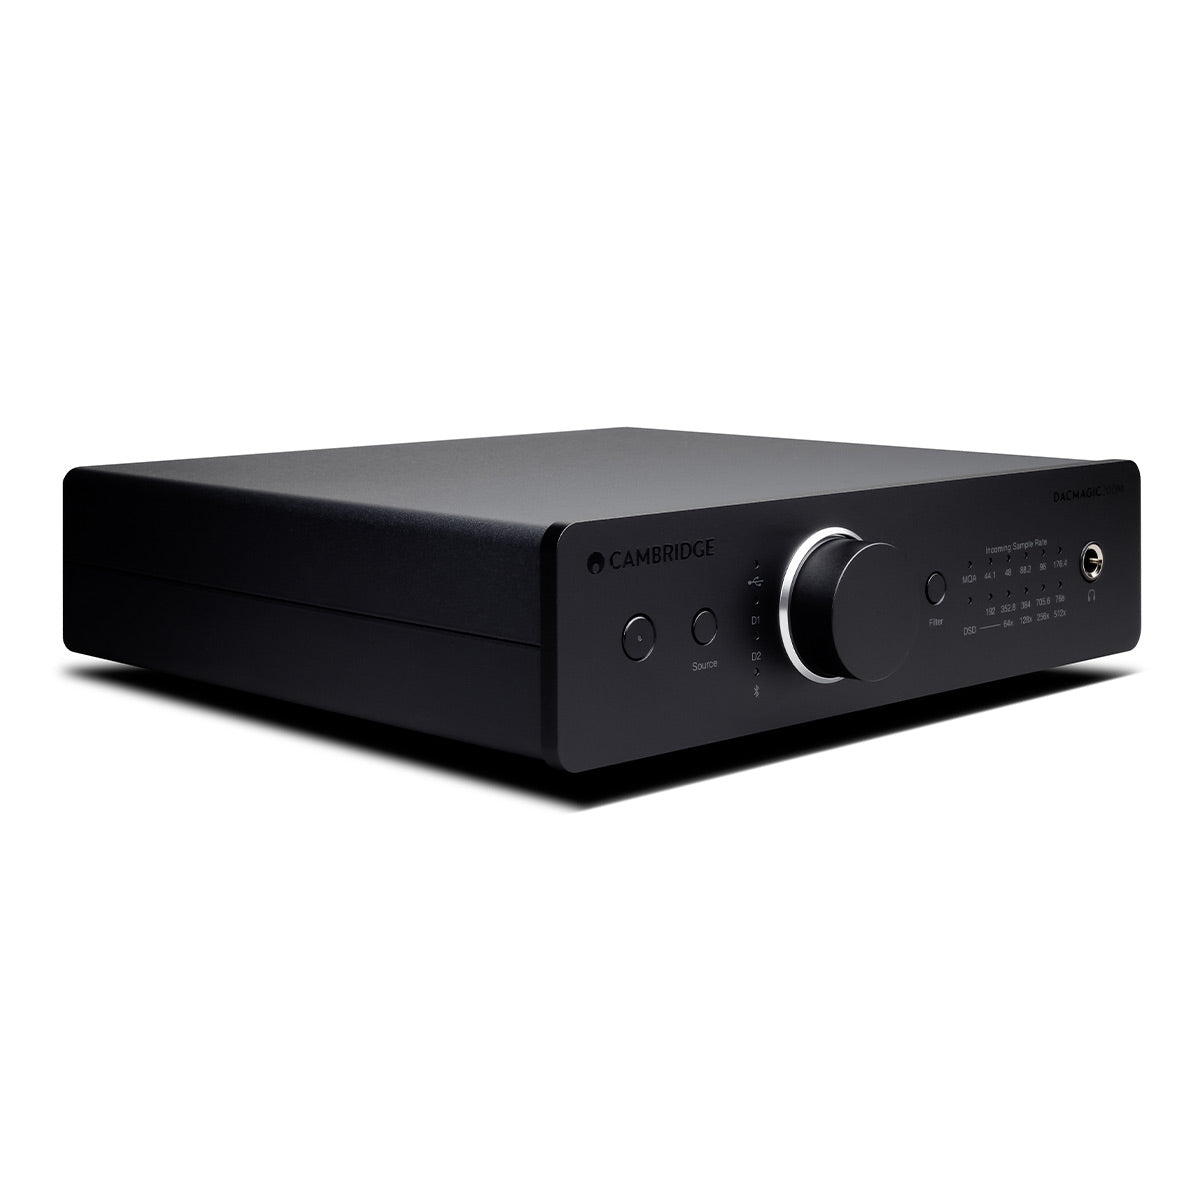 Cambridge Audio DacMagic 200M Digital-to-Audio Converter and Preamplifier with Bluetooth aptX (Limited Edition Black)